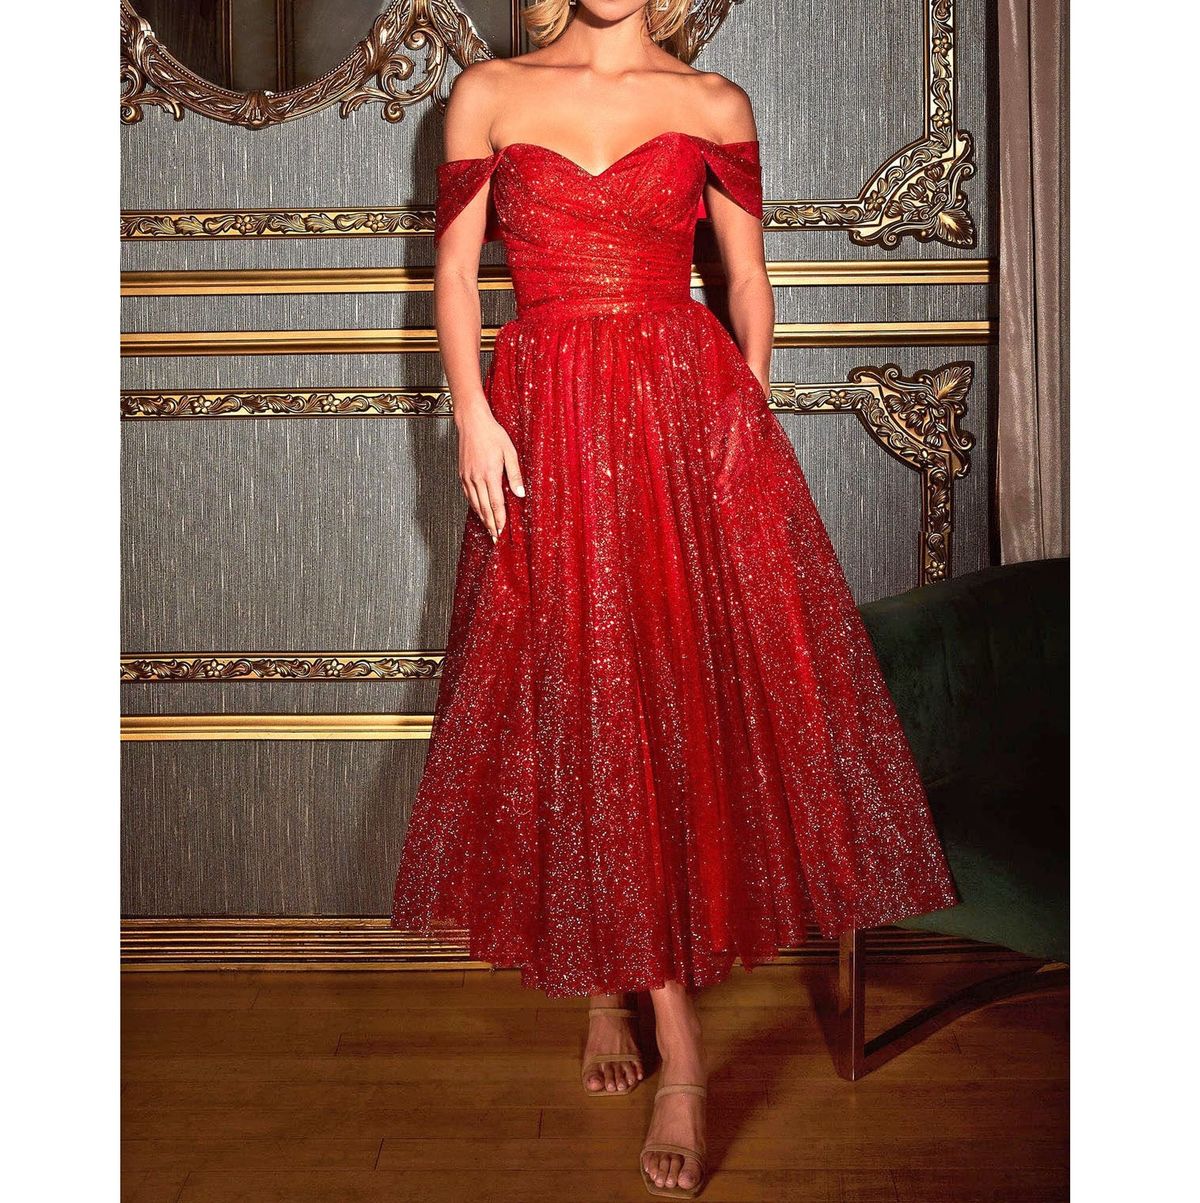 Style Red Sparkle Metallic Off the shoulder Formal Party Cocktail Midi Dress Cinderella Size 4 Homecoming Off The Shoulder Red A-line Dress on Queenly